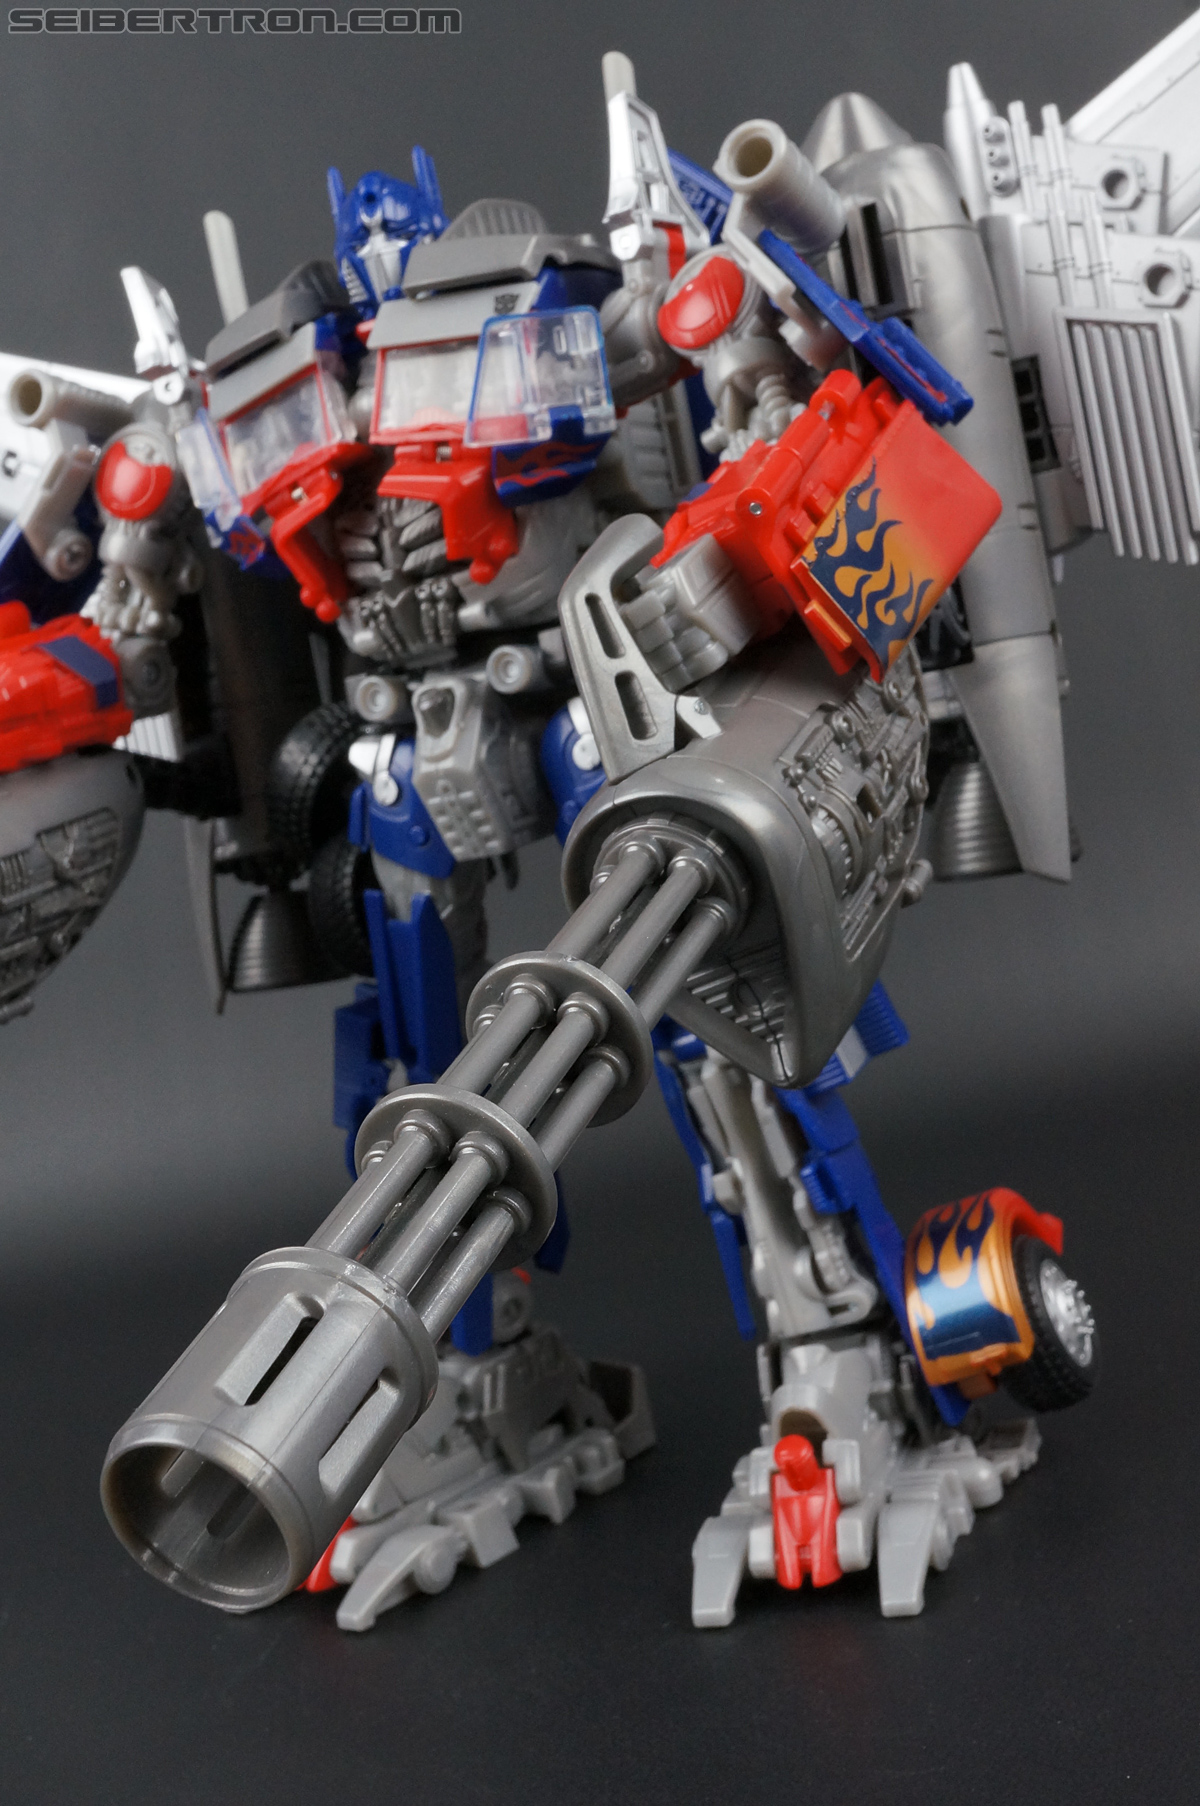 Transformers Dark of the Moon Jetwing Optimus Prime (Image #225 of 300)